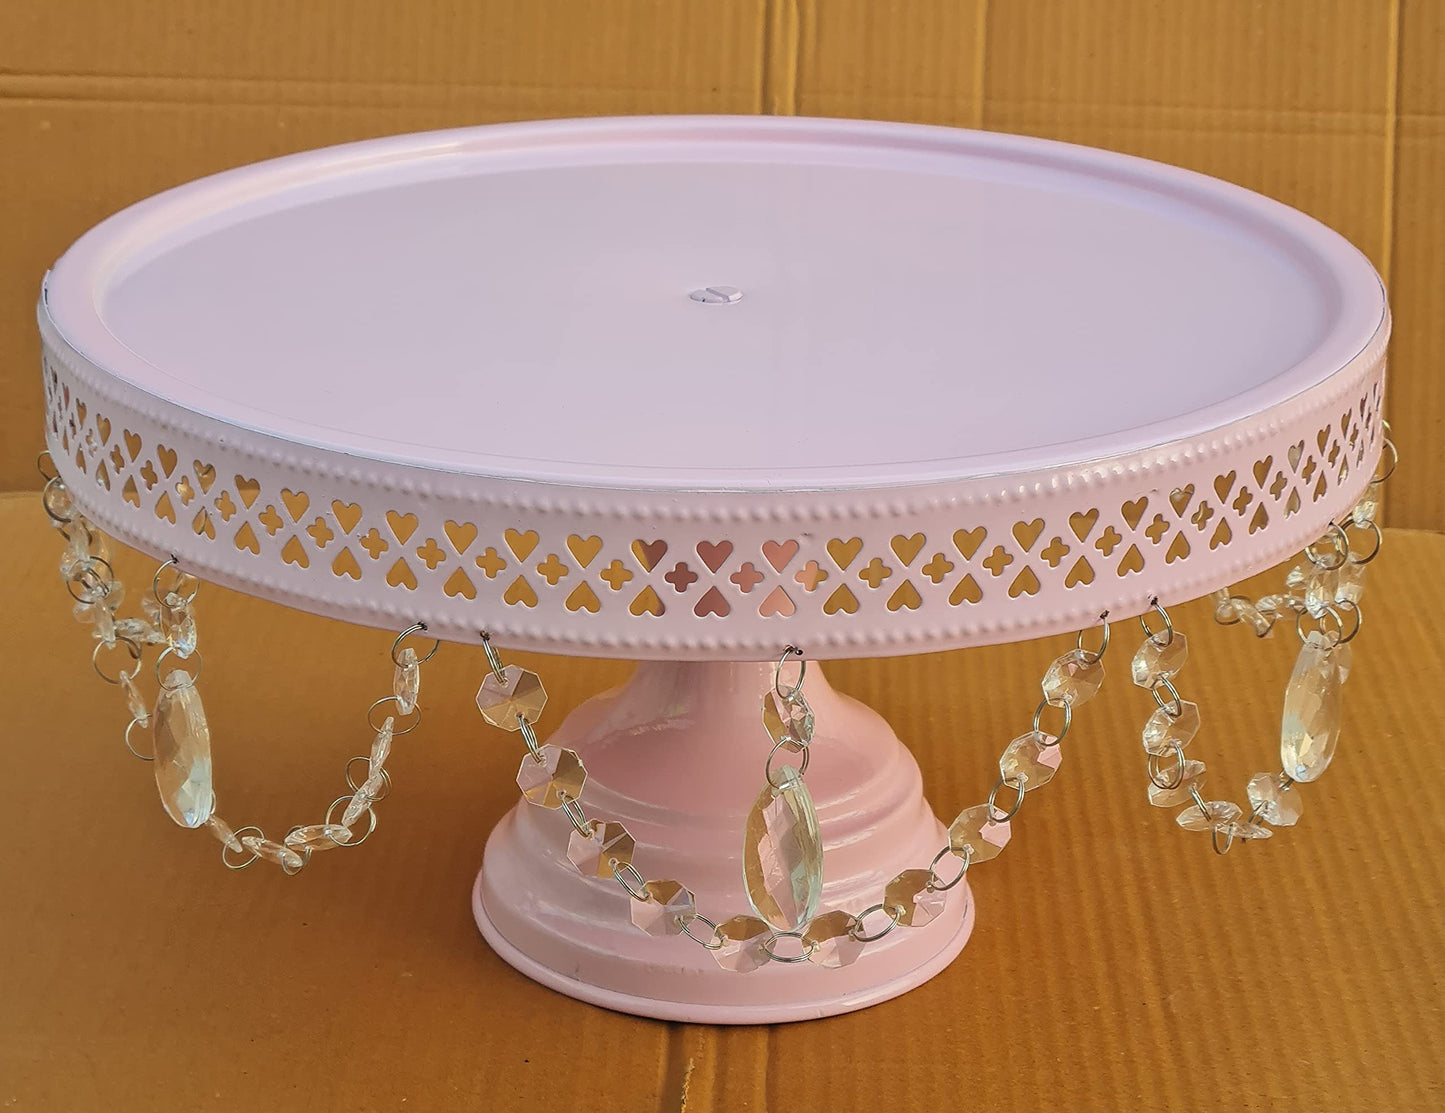 GiftBay Creations Cake Stand Pedestal 13" Diameter (Top), Strong Metal with Clear Hanging Crystals (Pink)